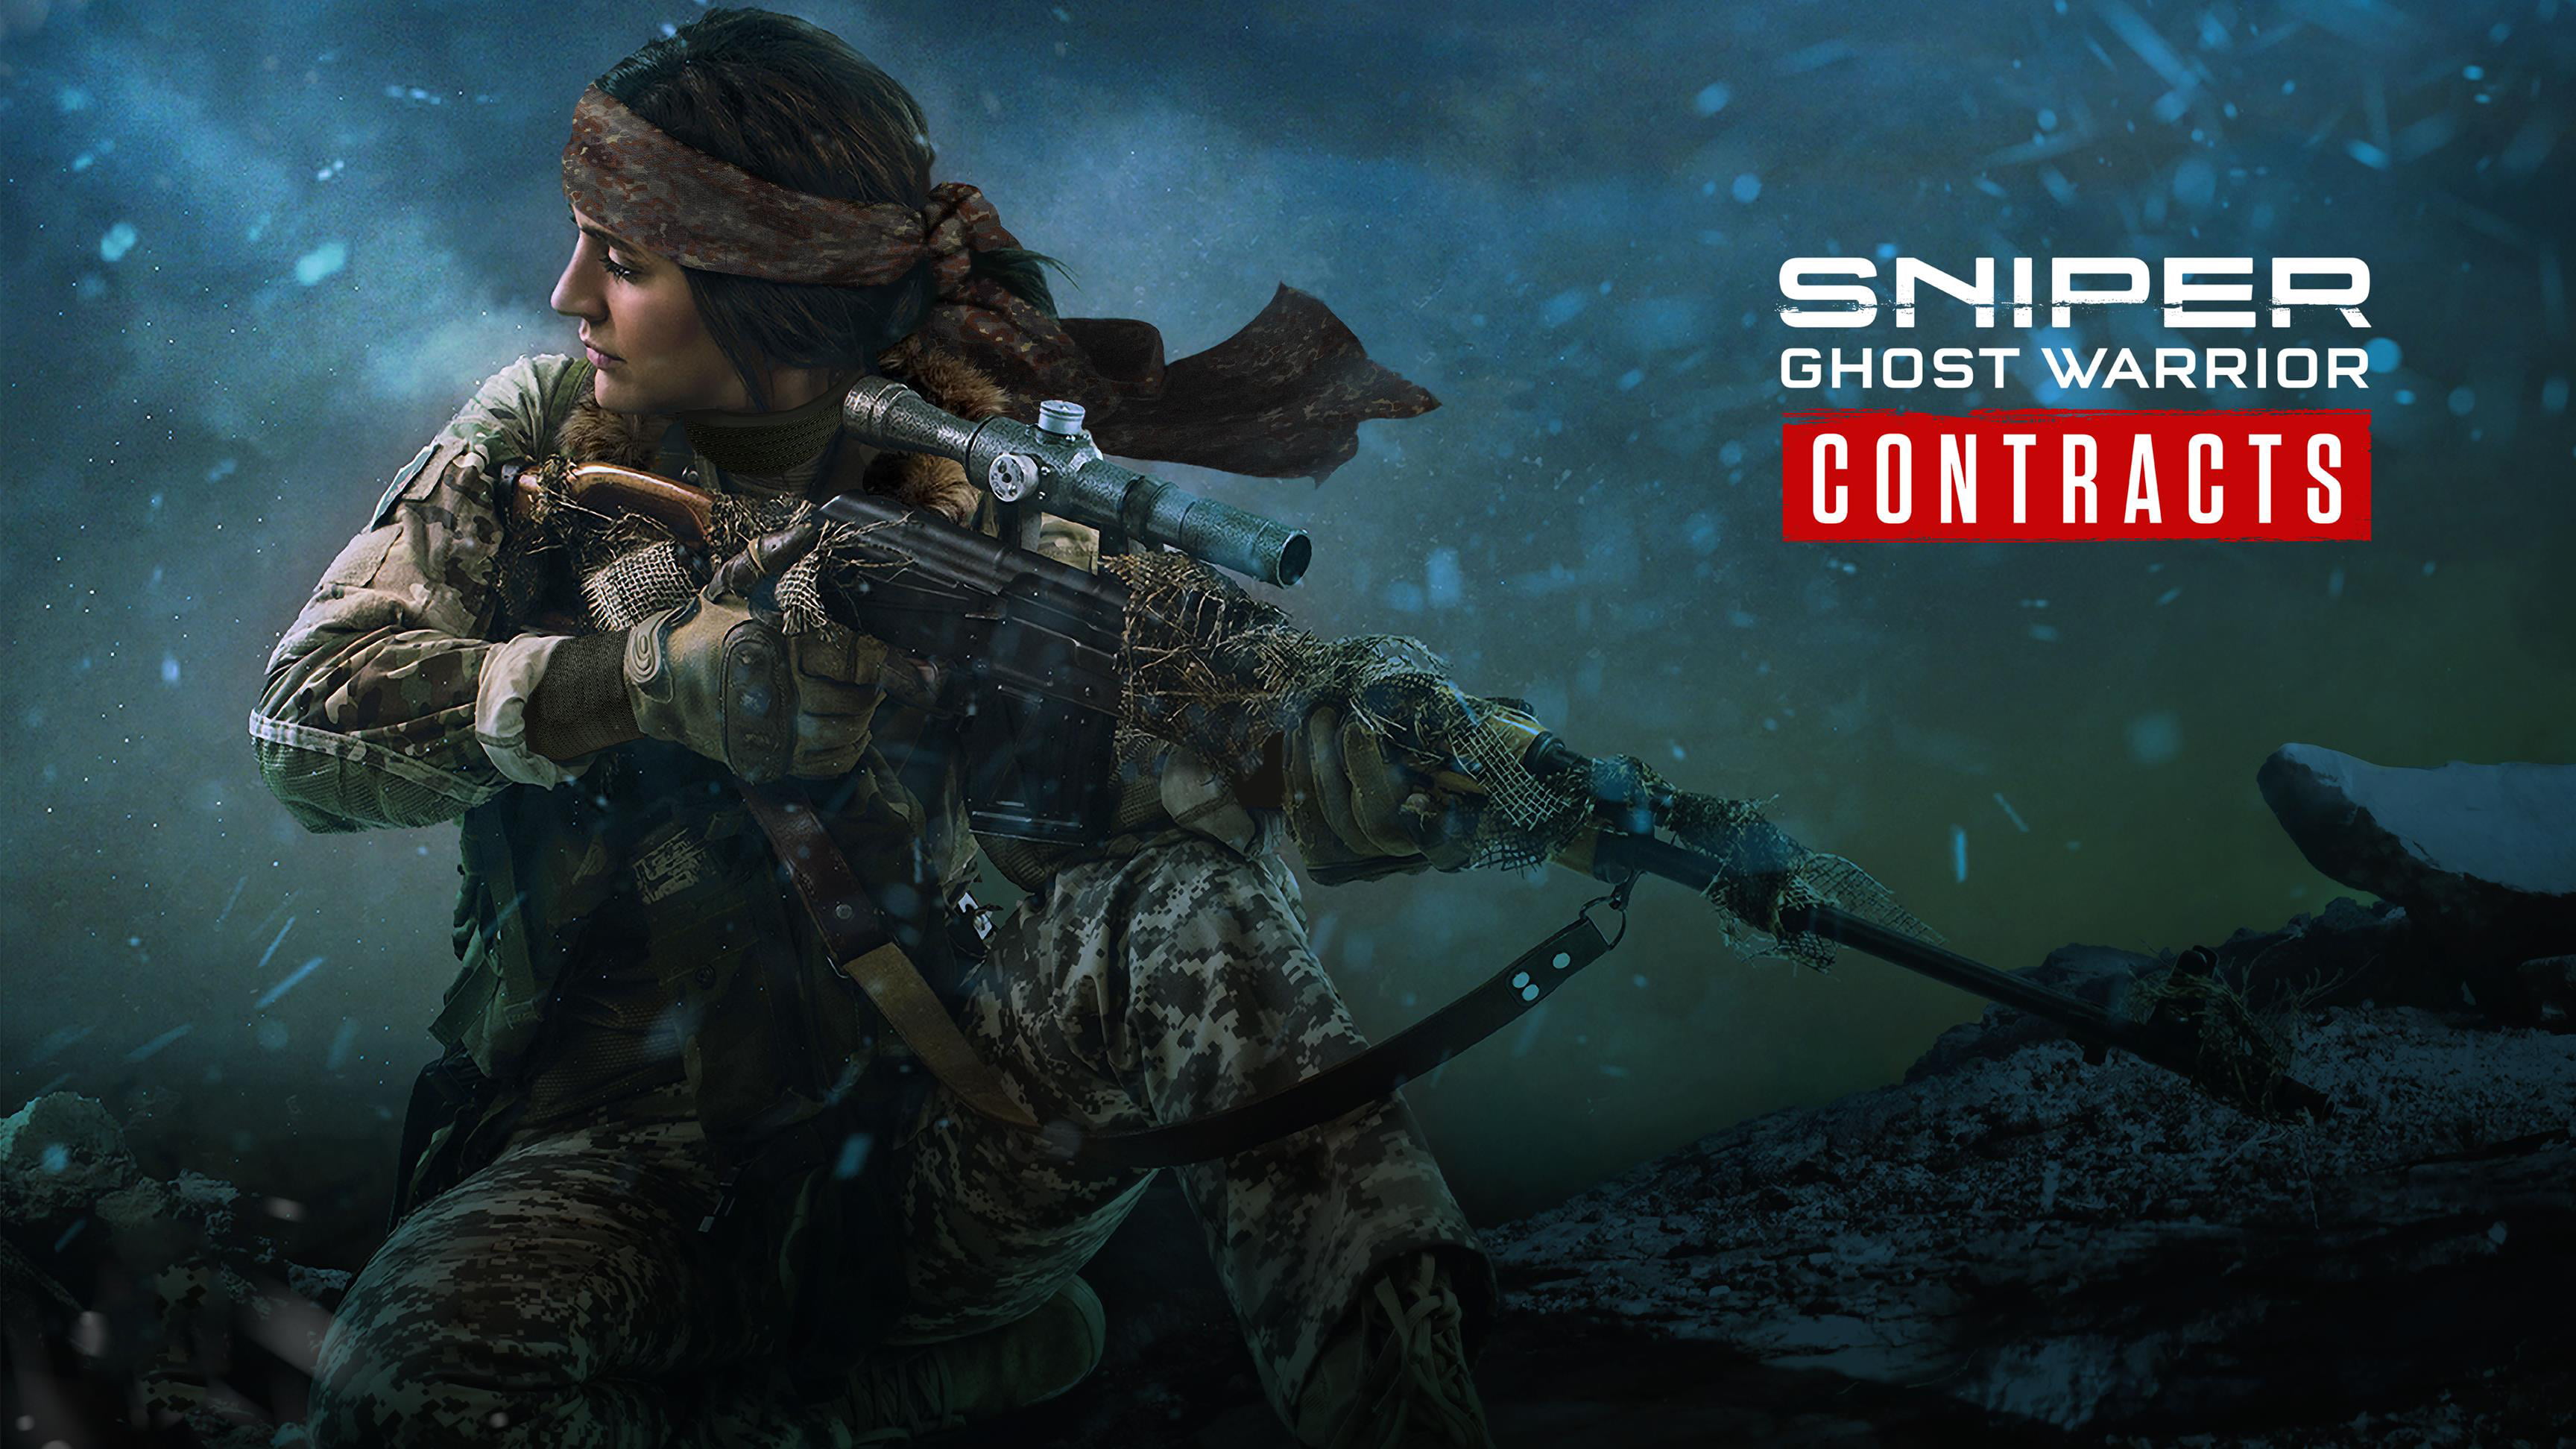 Video Game, Sniper: Ghost Warrior Contracts